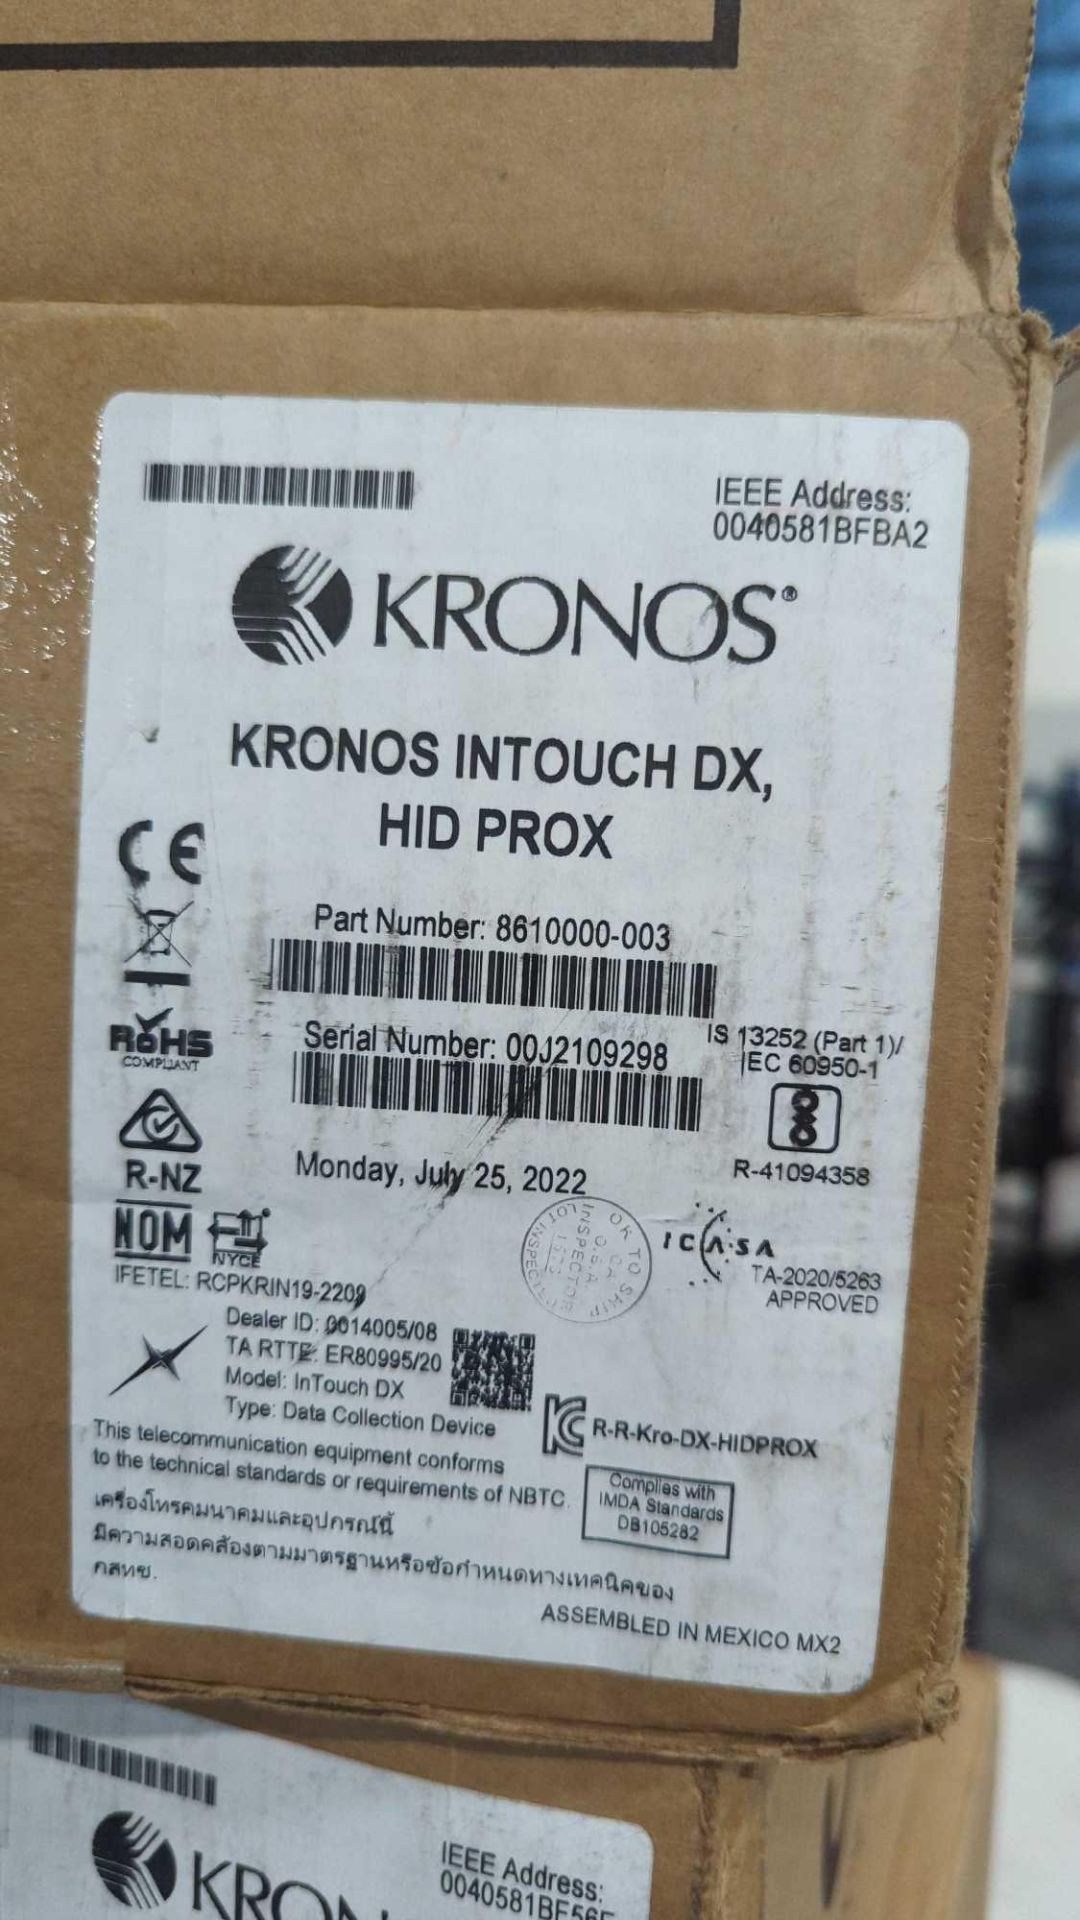 4 Kronos in touch DX HID Prox - Image 5 of 7